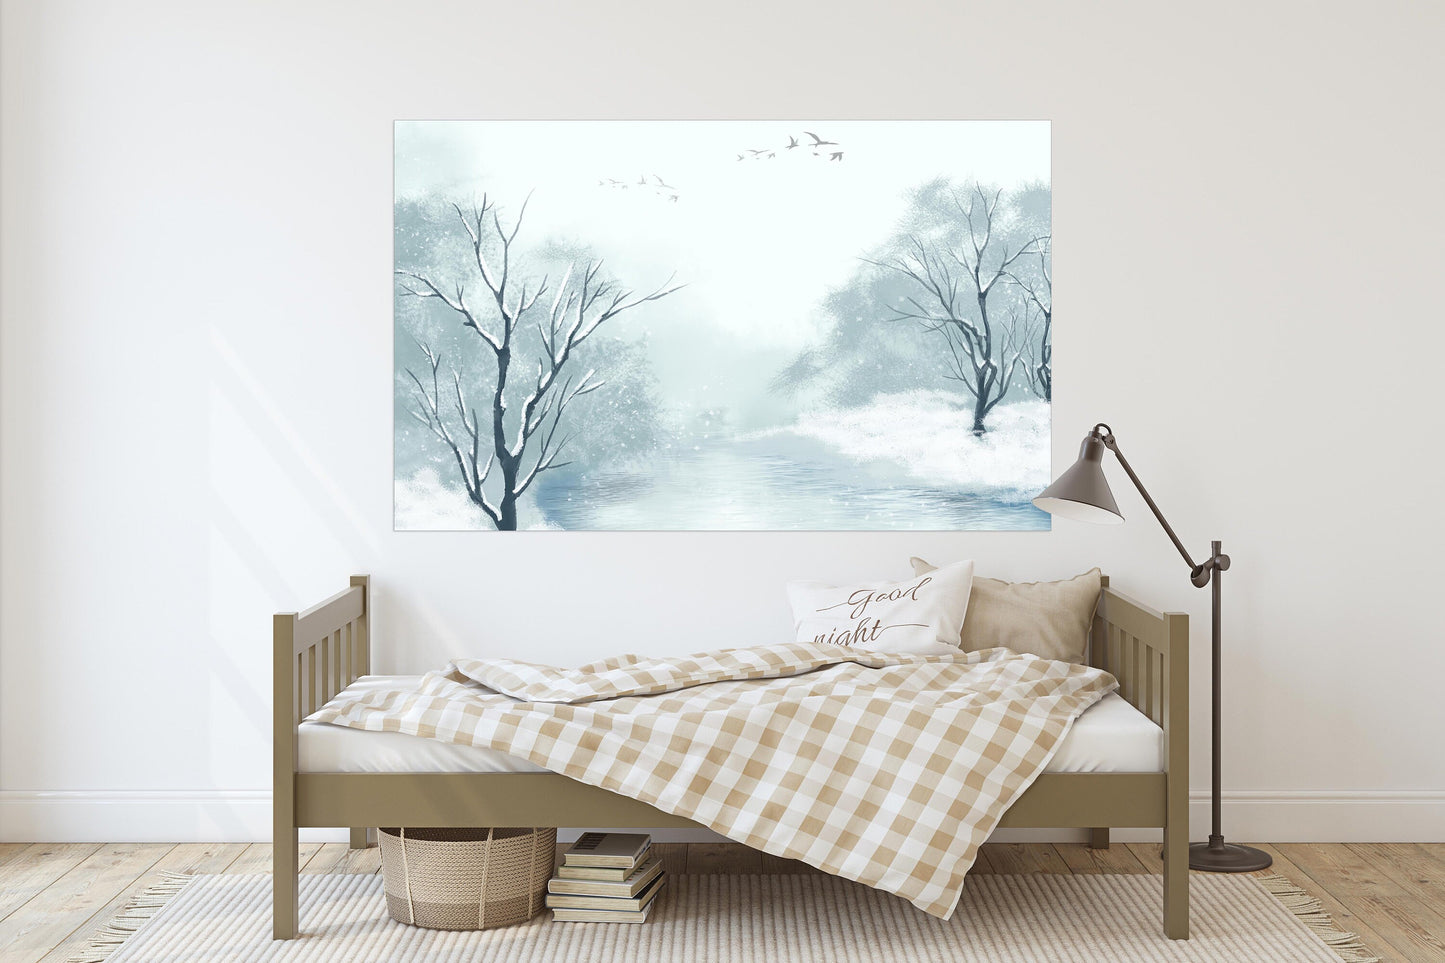 Winter wonderland Wake forest Modern abstract Canvas painting Original wall art print on canvas unique gift Wall decor